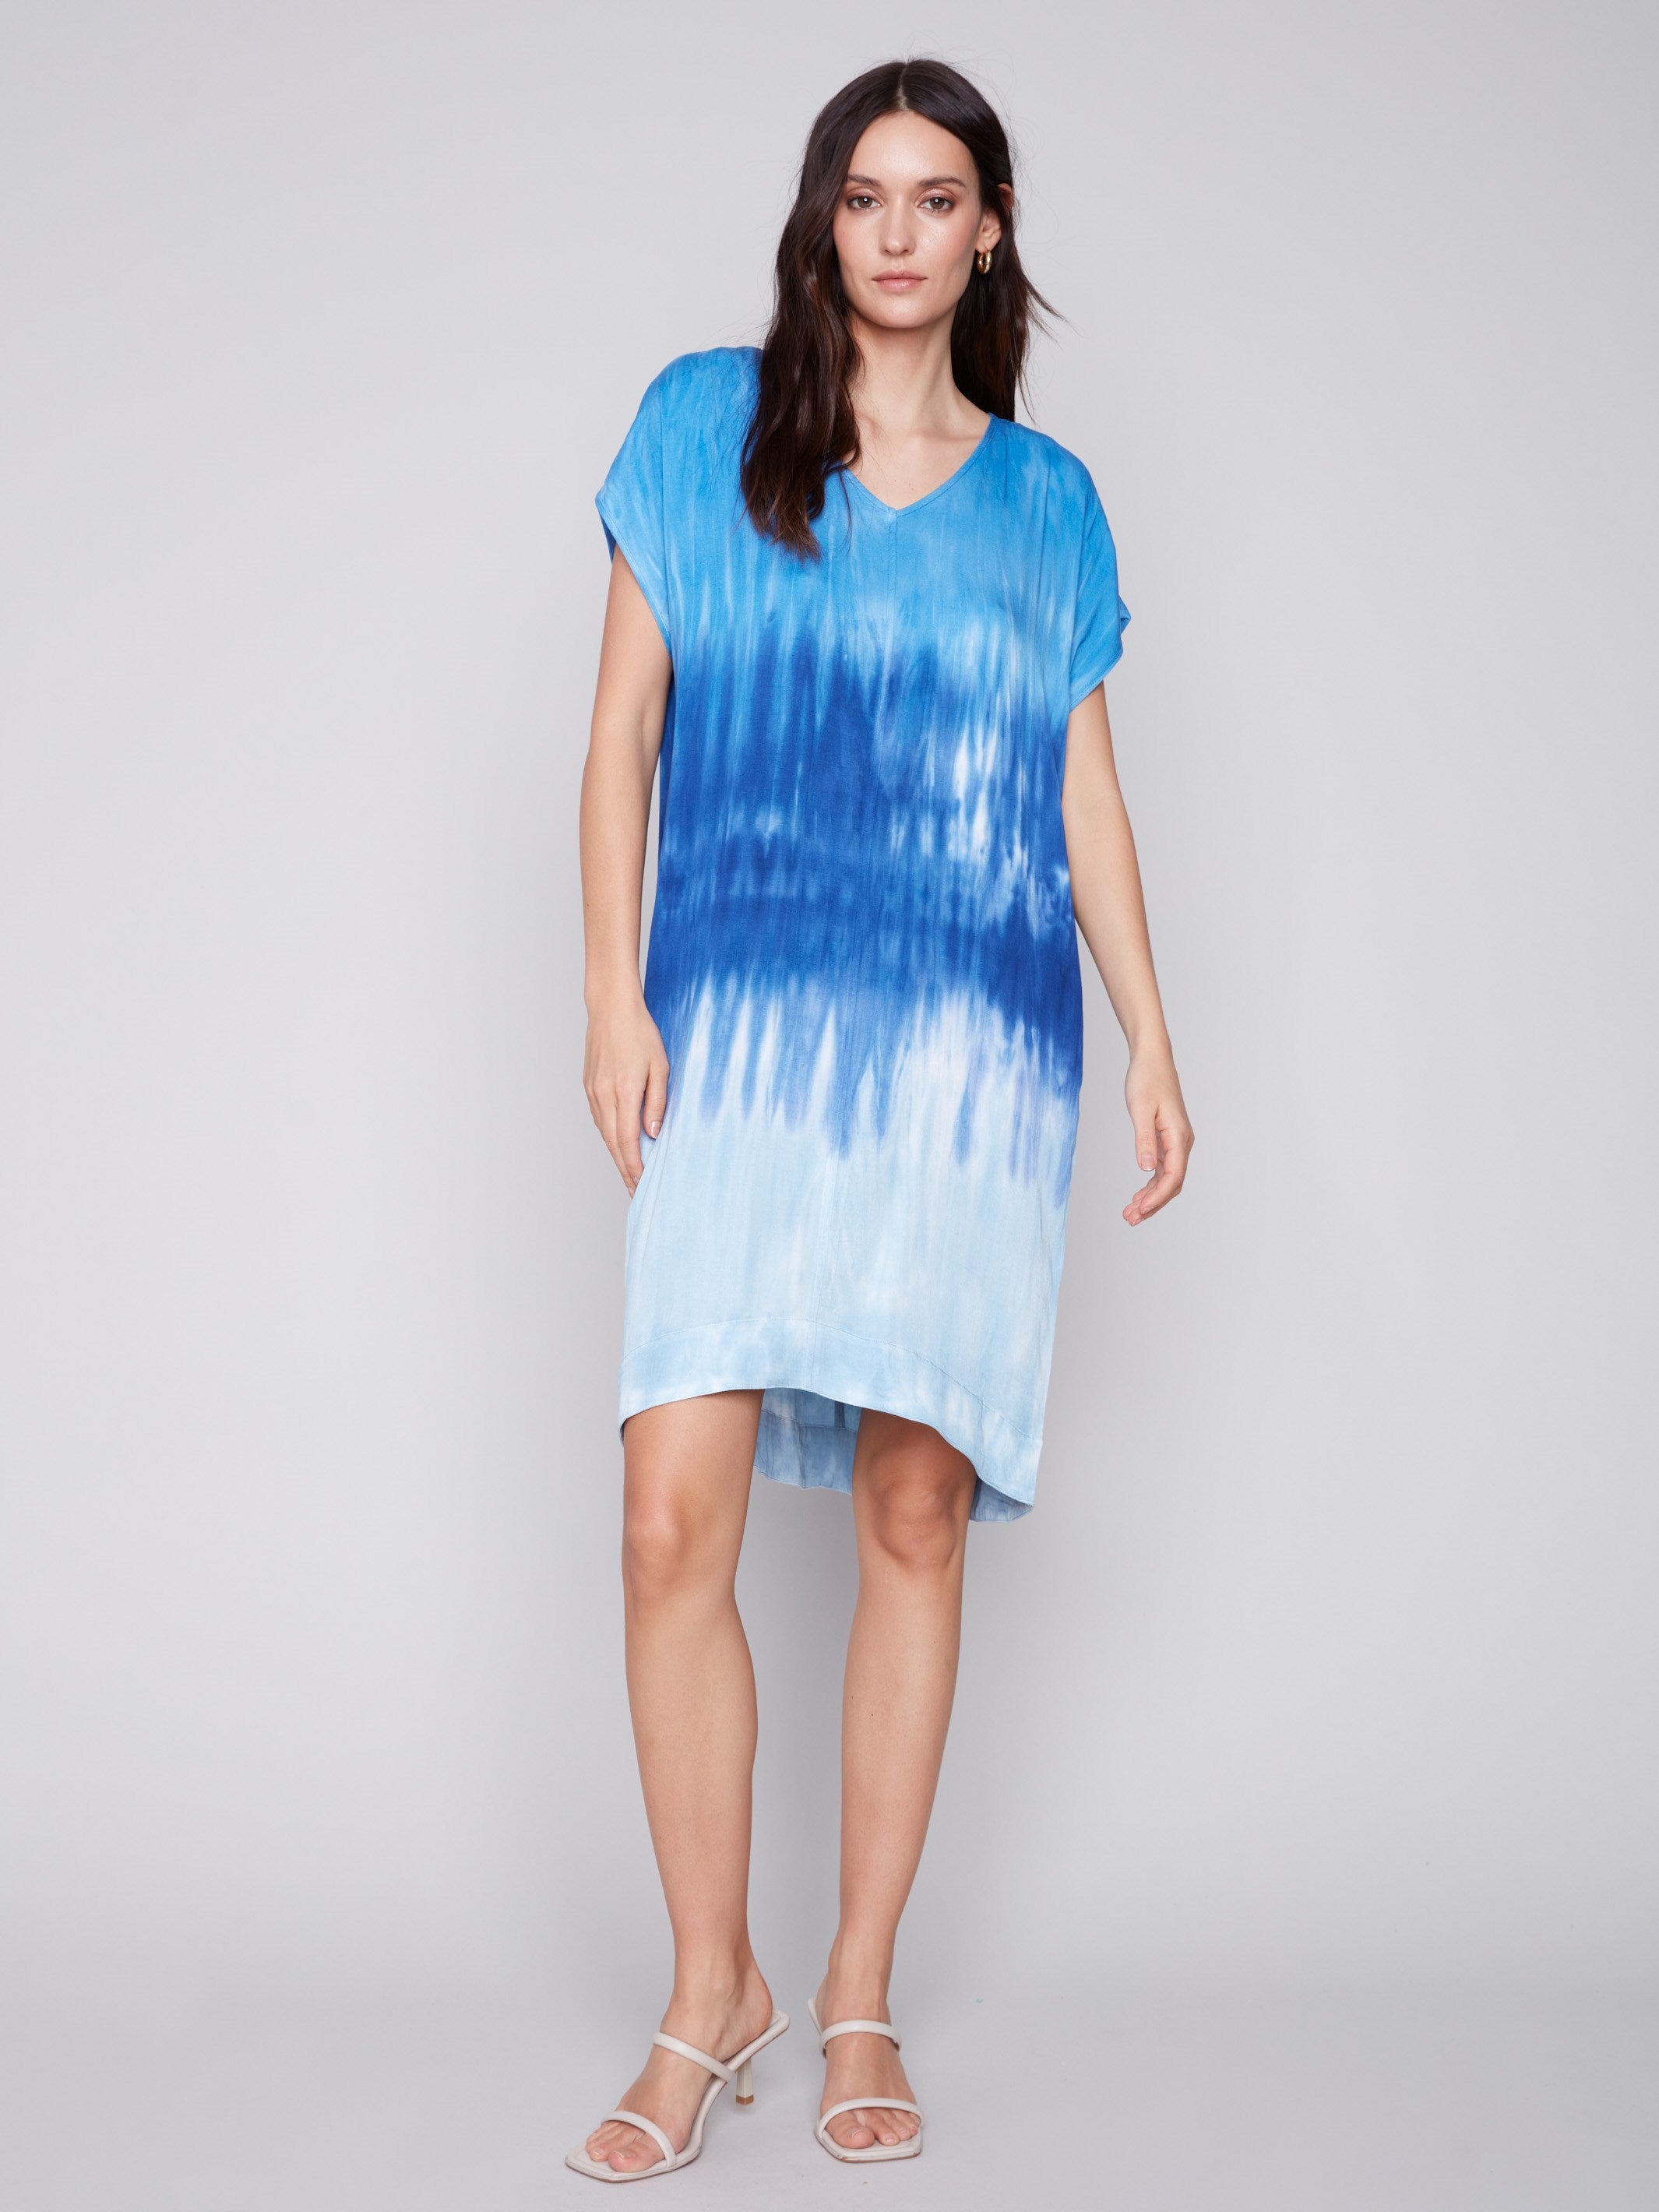 Tie-Dye Dress with Dolman Sleeves - Sky - Charlie B Collection Canada - Image 2